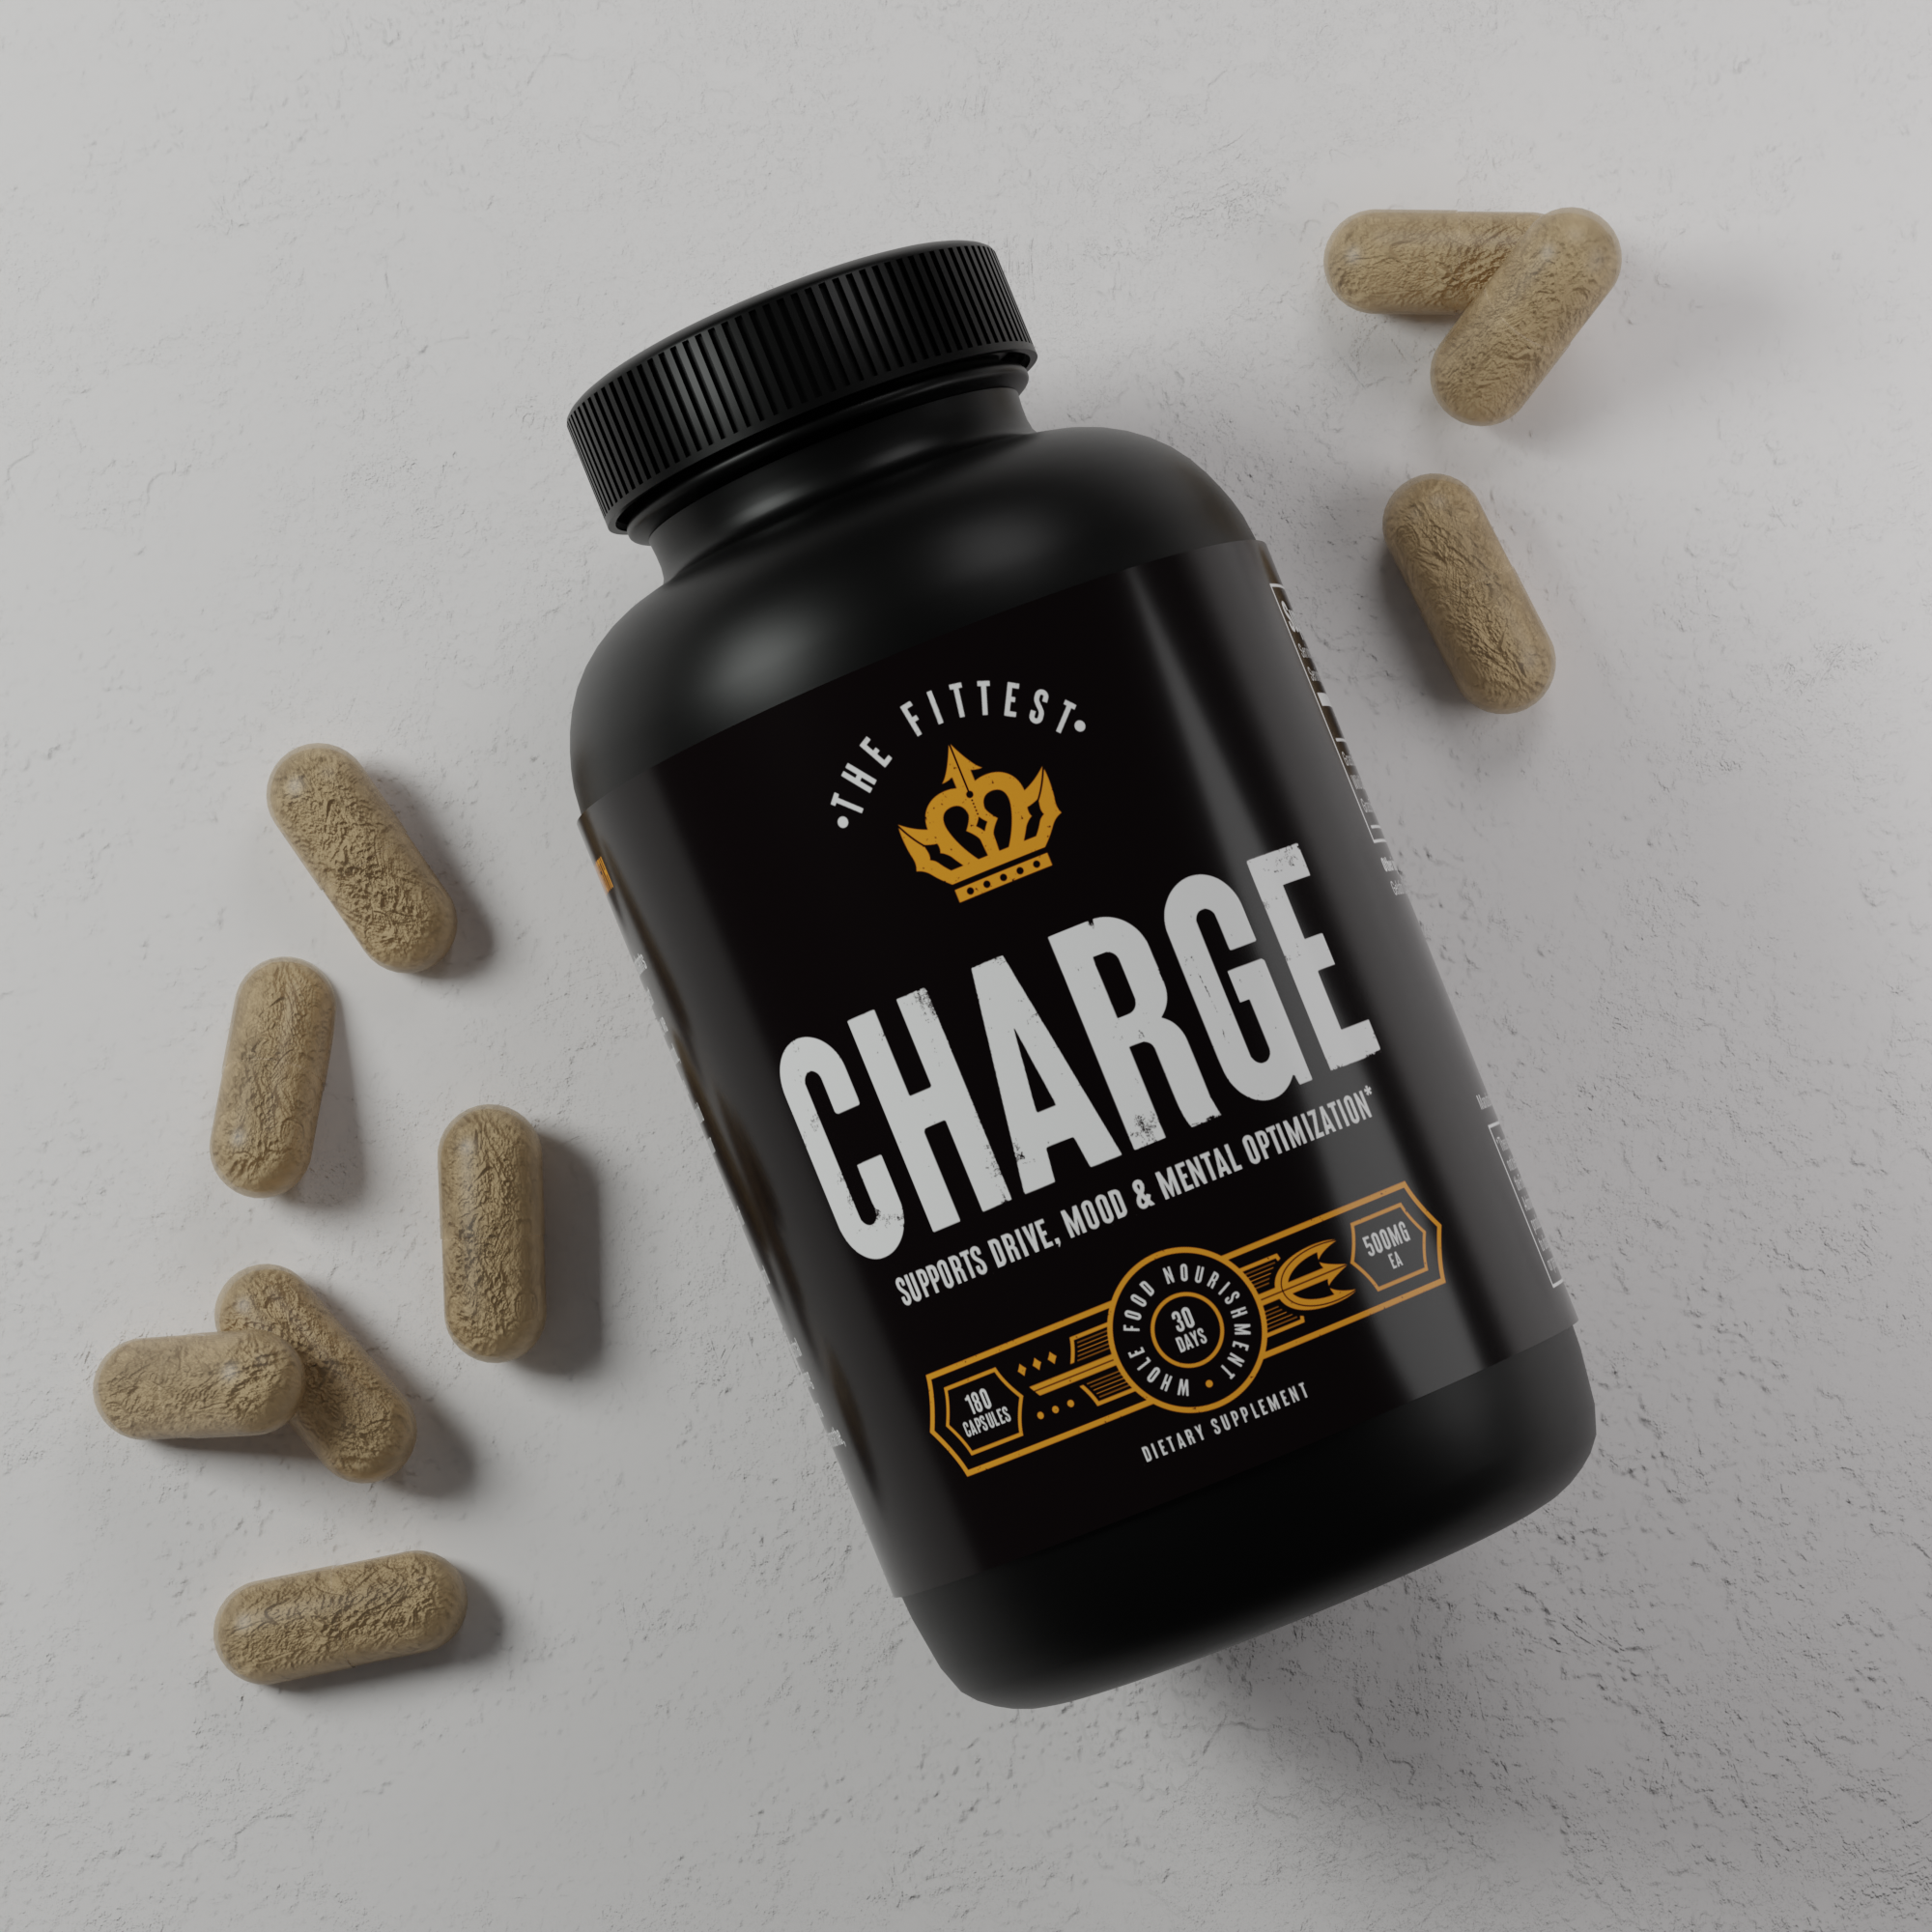 A bottle of Charge laying on top of the capsules which have spilled onto the counter